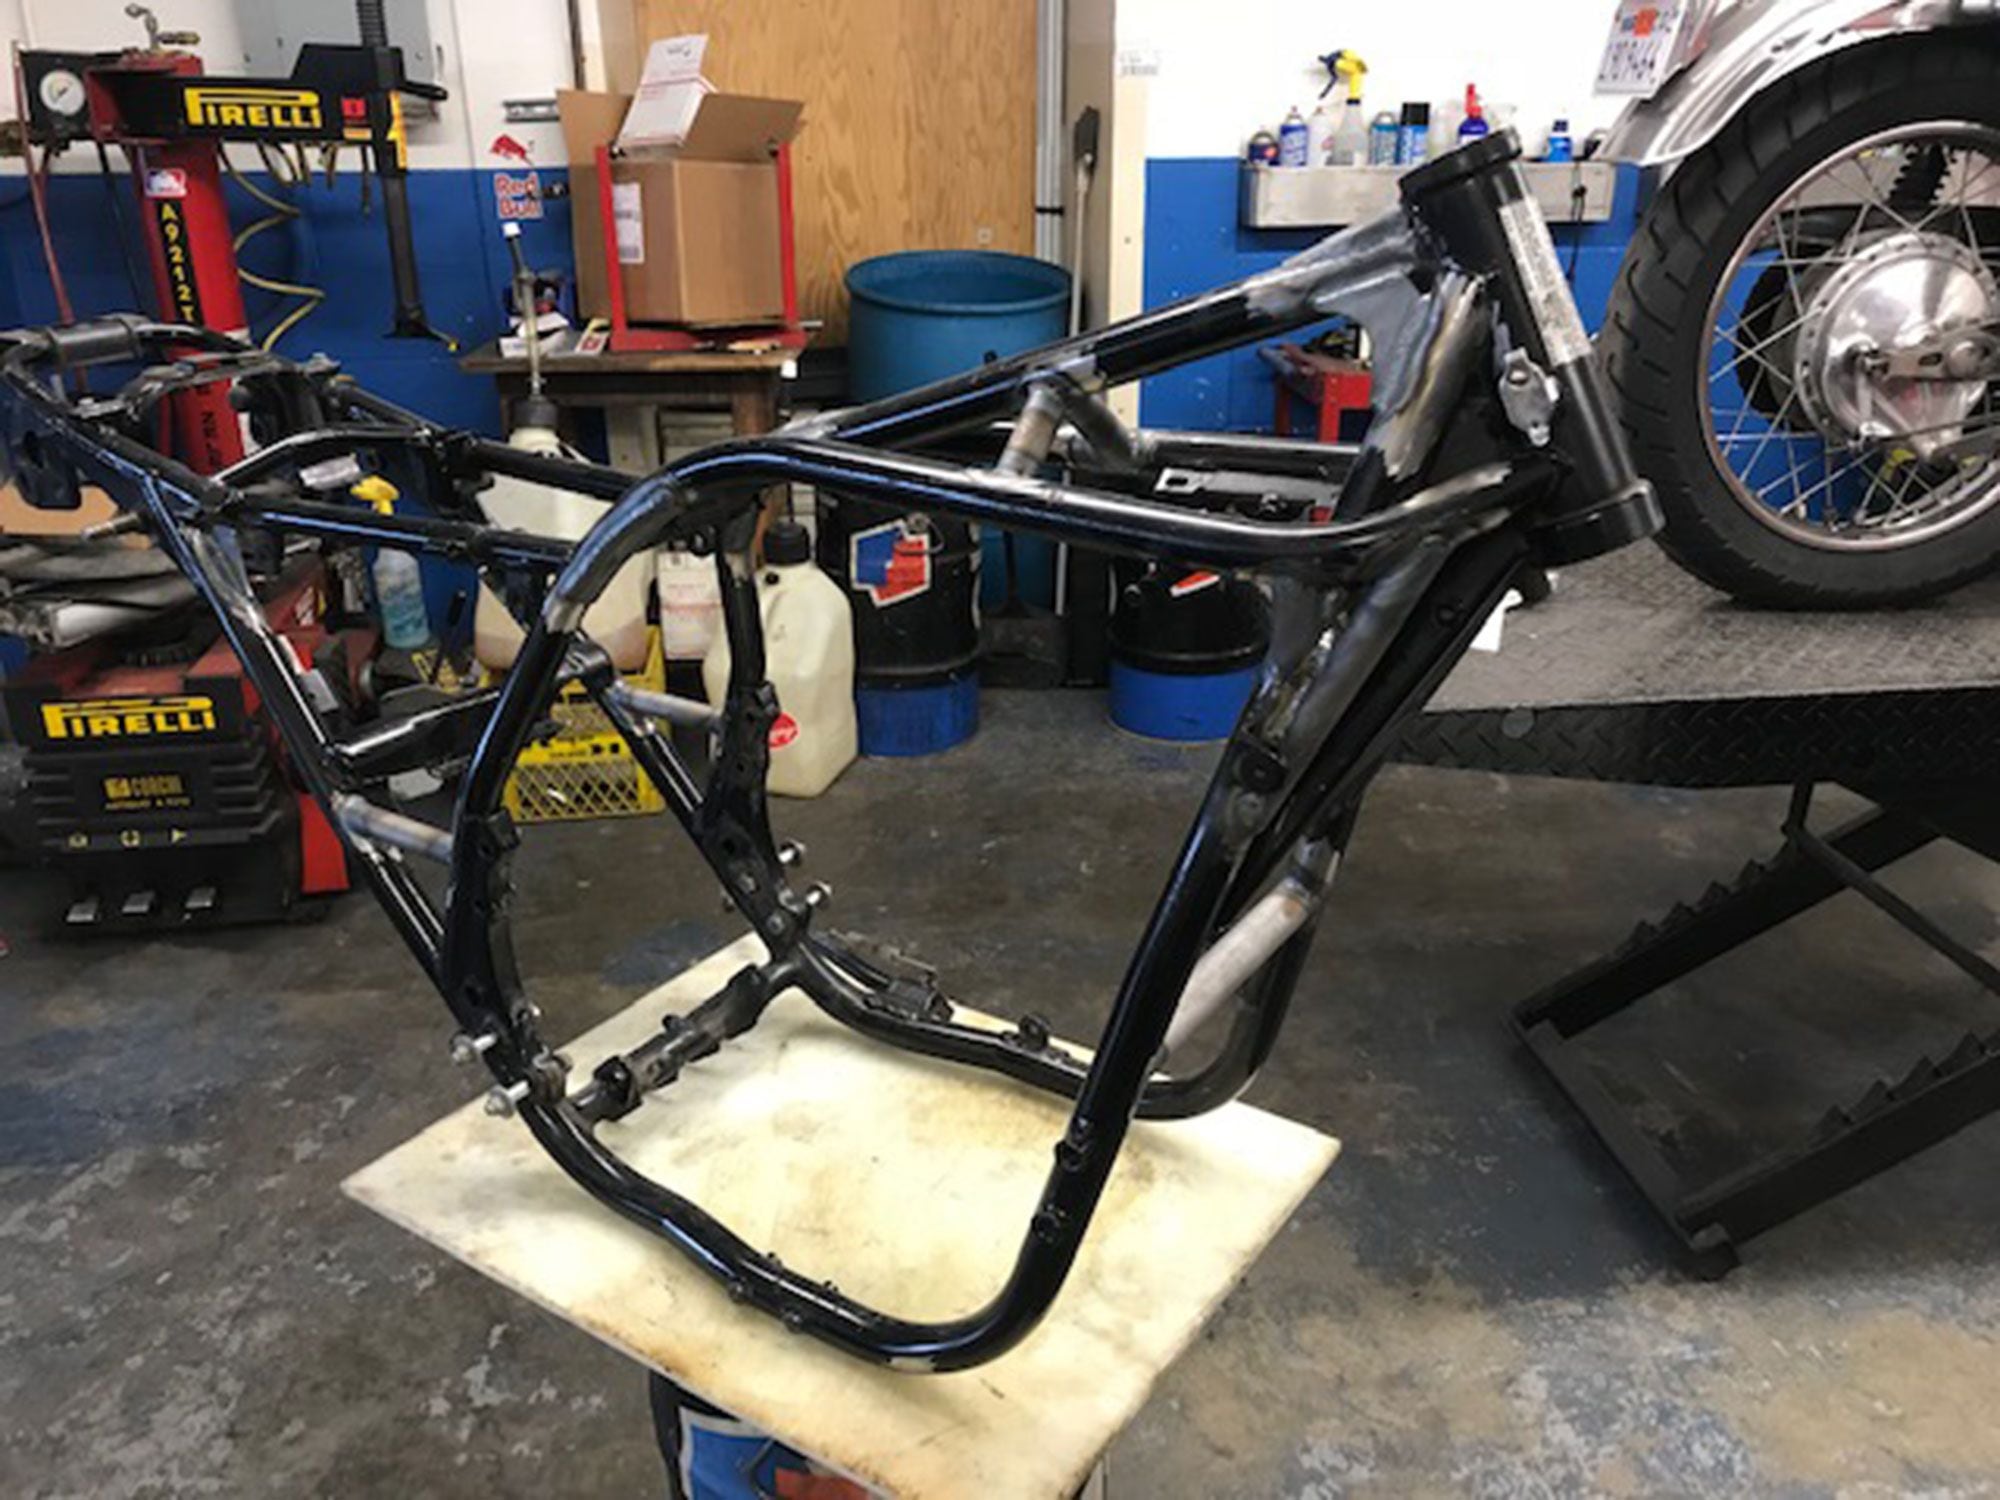 The bare frame was strategically gusseted by Jerry Burac, based on what racers learned back in the day, and in the decades since. The frame-gusset kit and upgraded engine mounts come in a kit from Andrew’s longtime supplier, JB Racing.